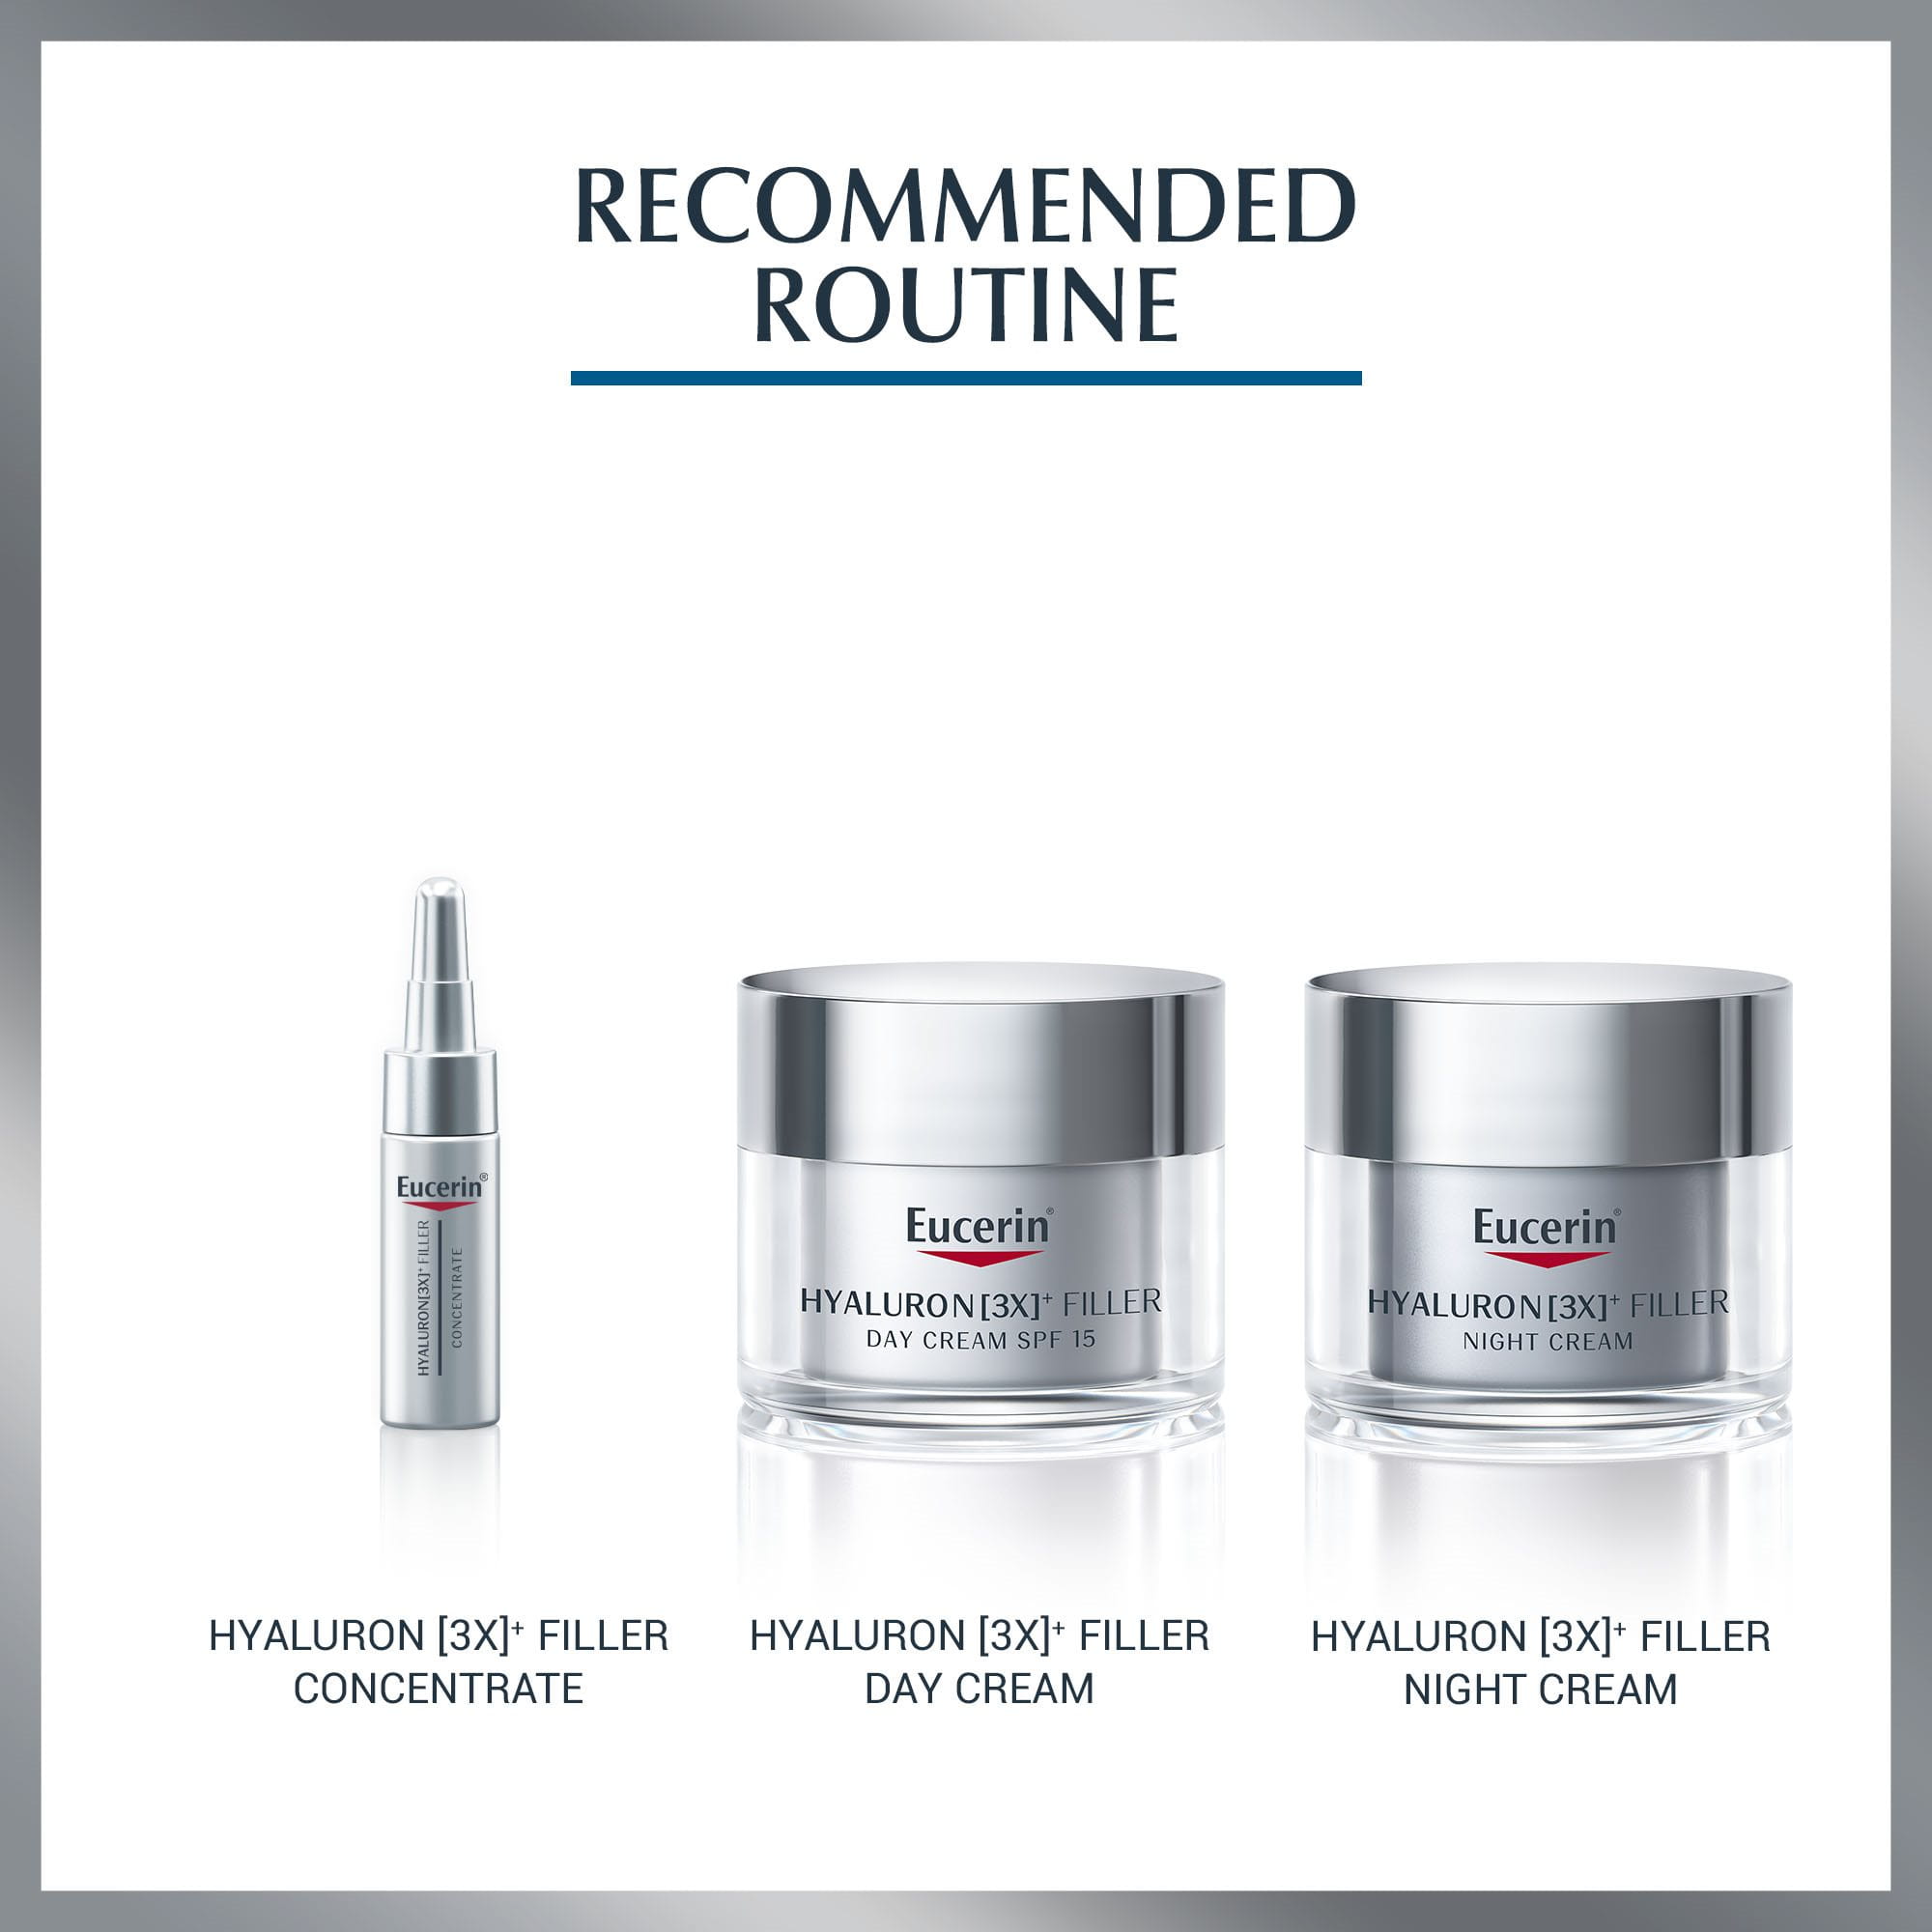 hyaluron filler eye cream recommended routine